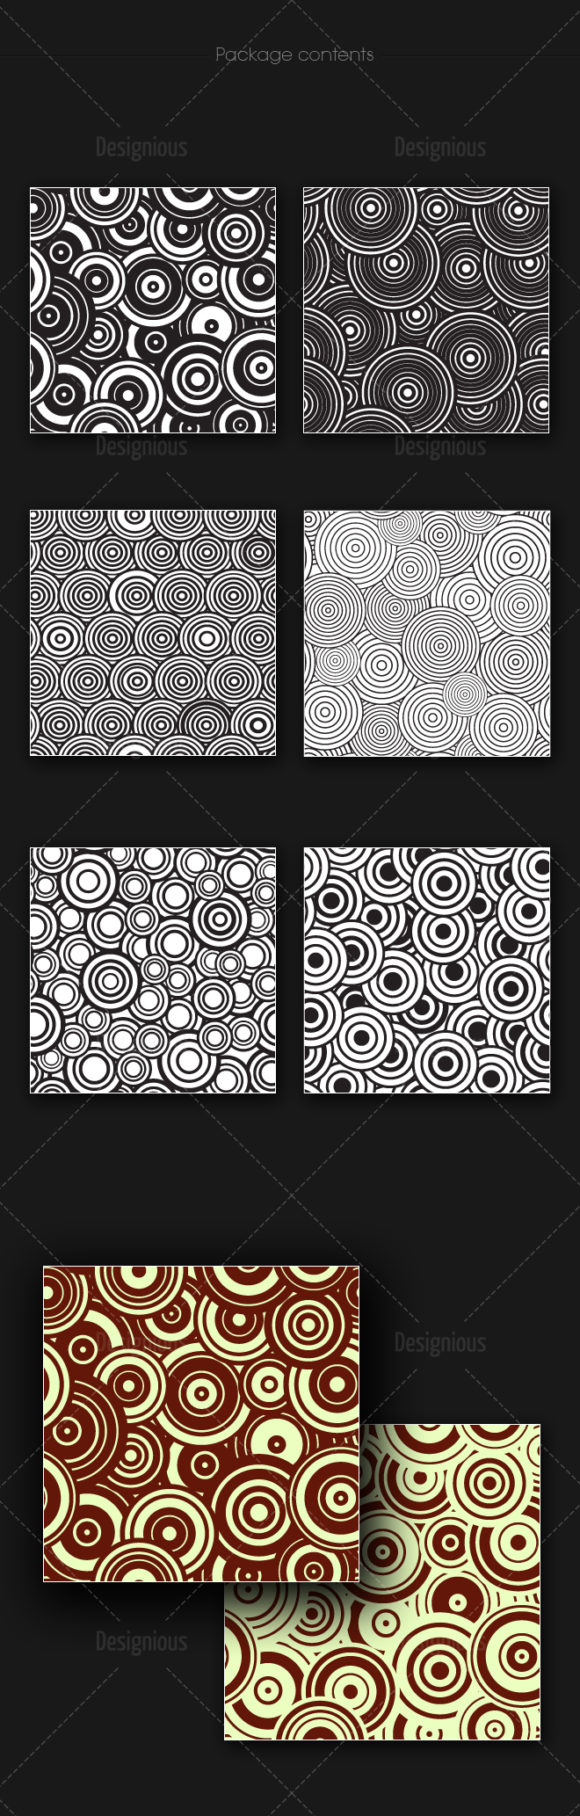 Seamless Patterns Vector Pack 161 2